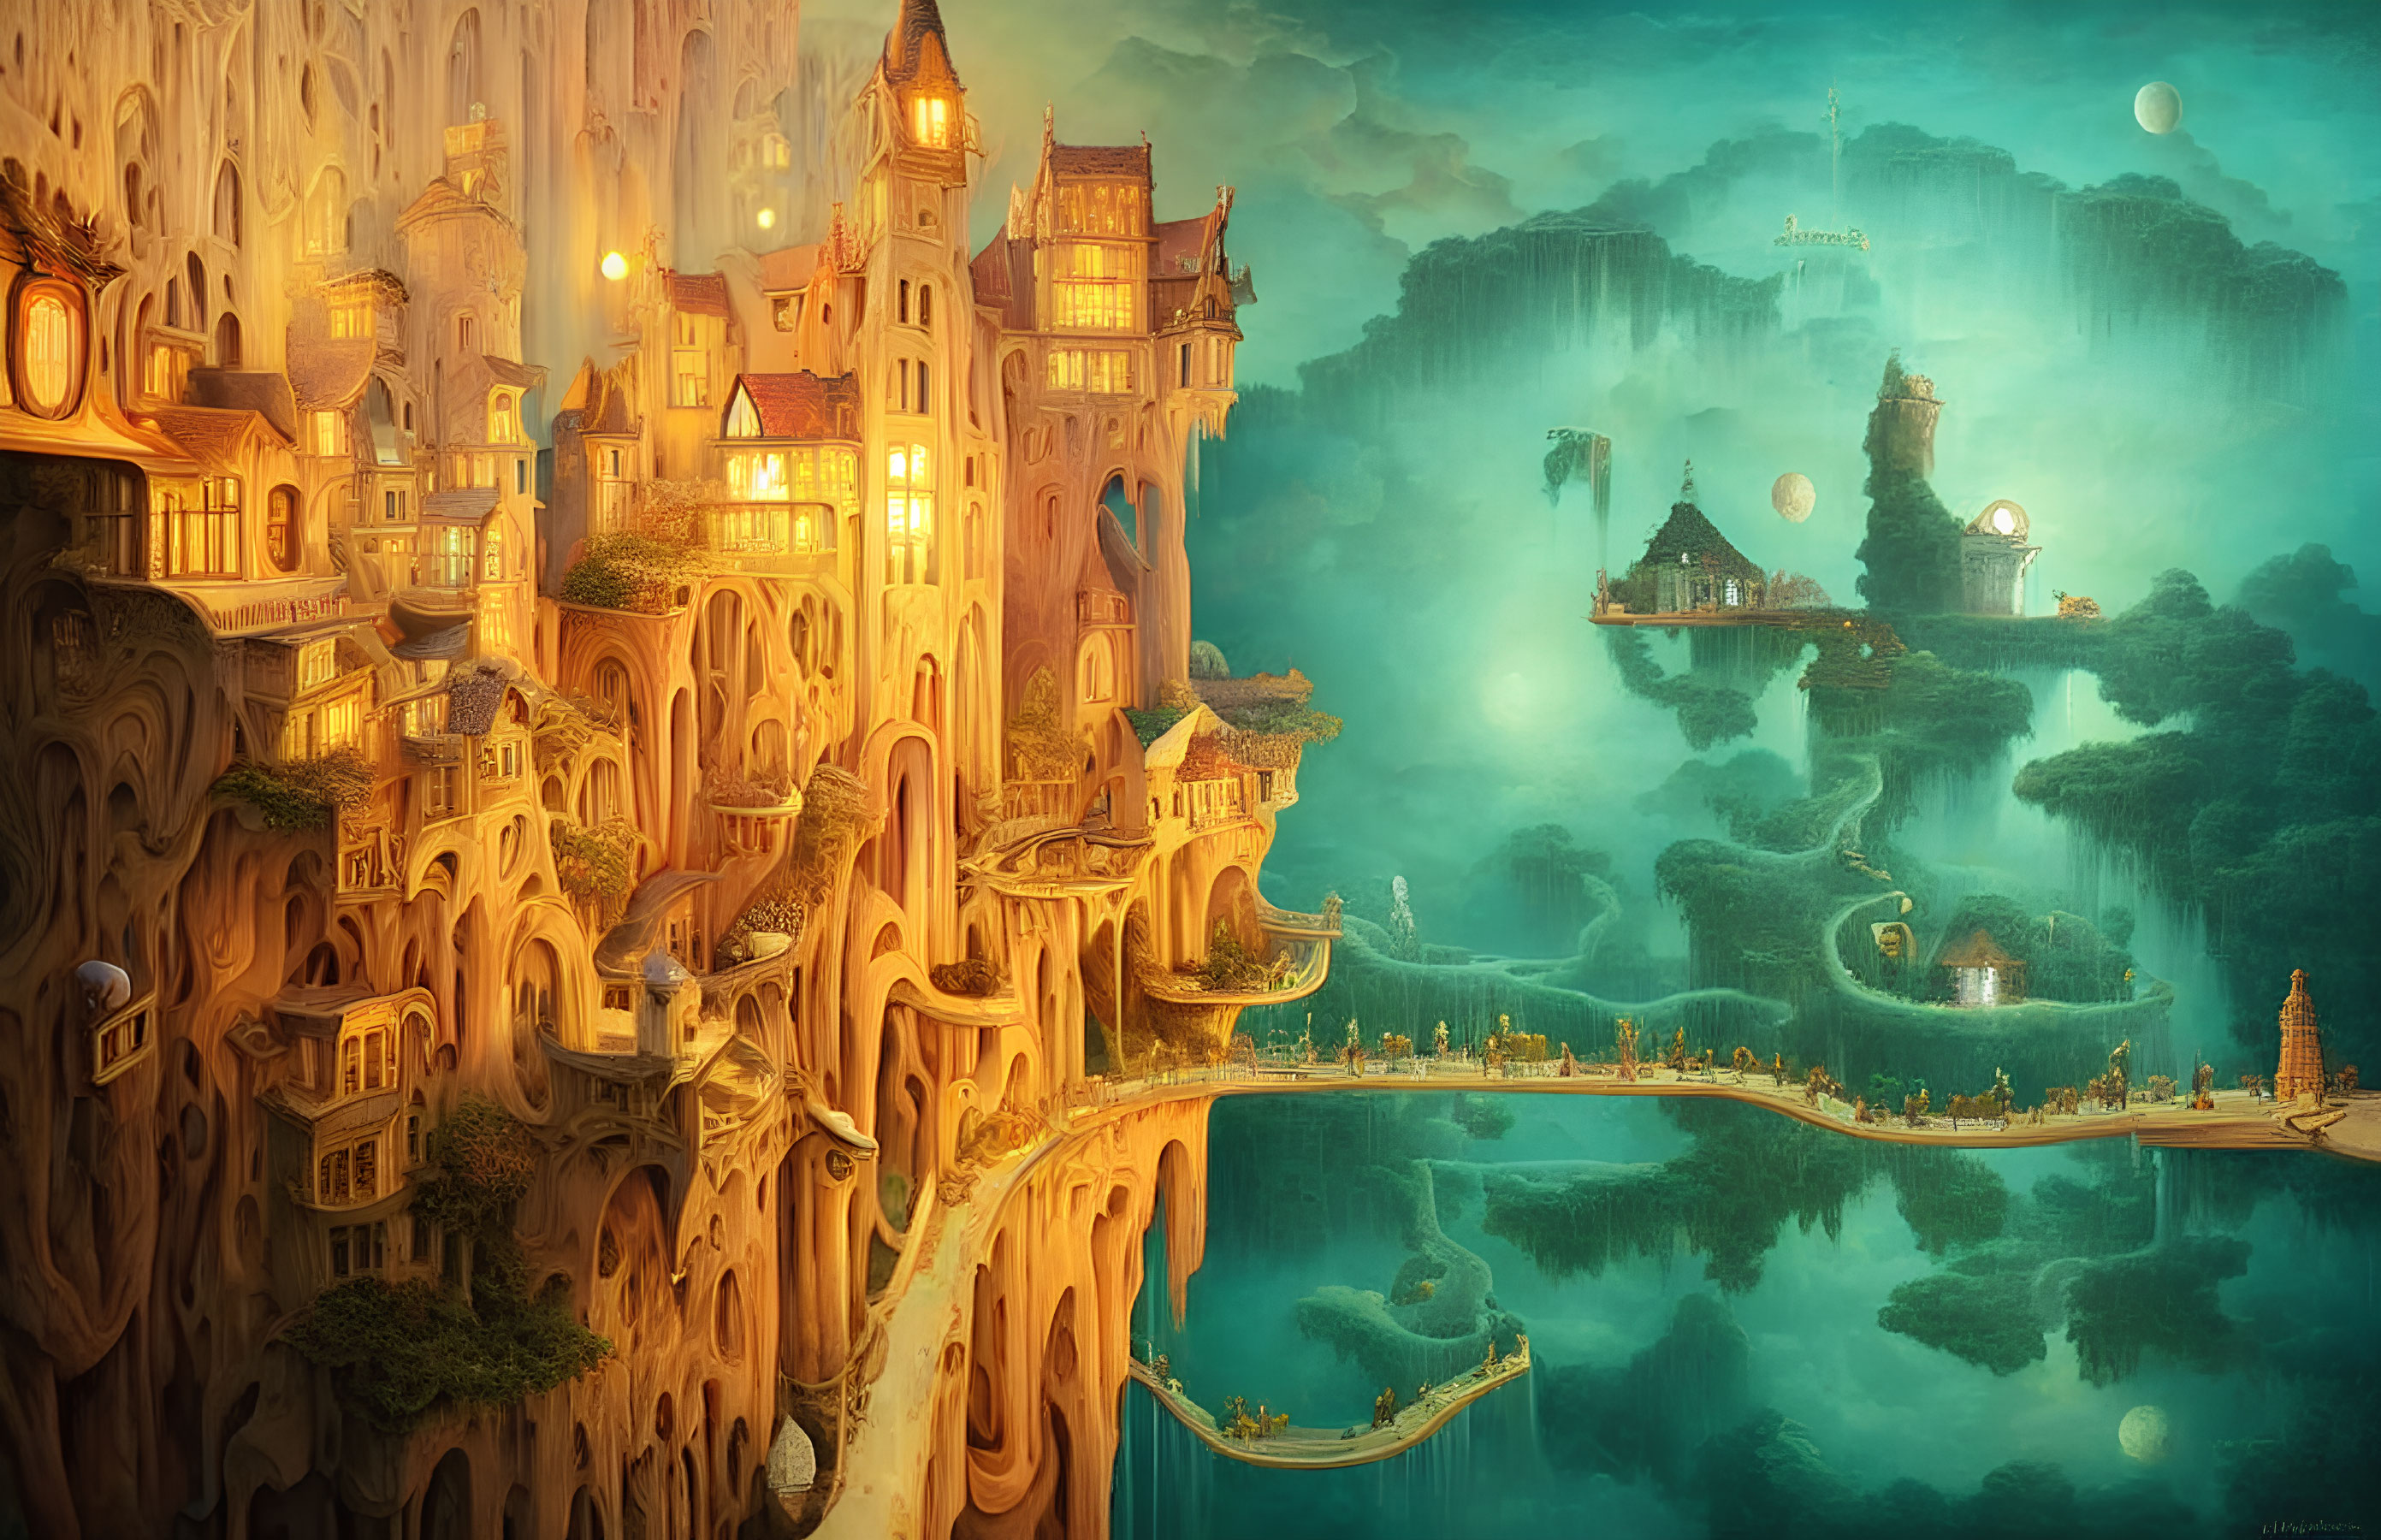 Fantastical city with ornate buildings carved into towering cliffs